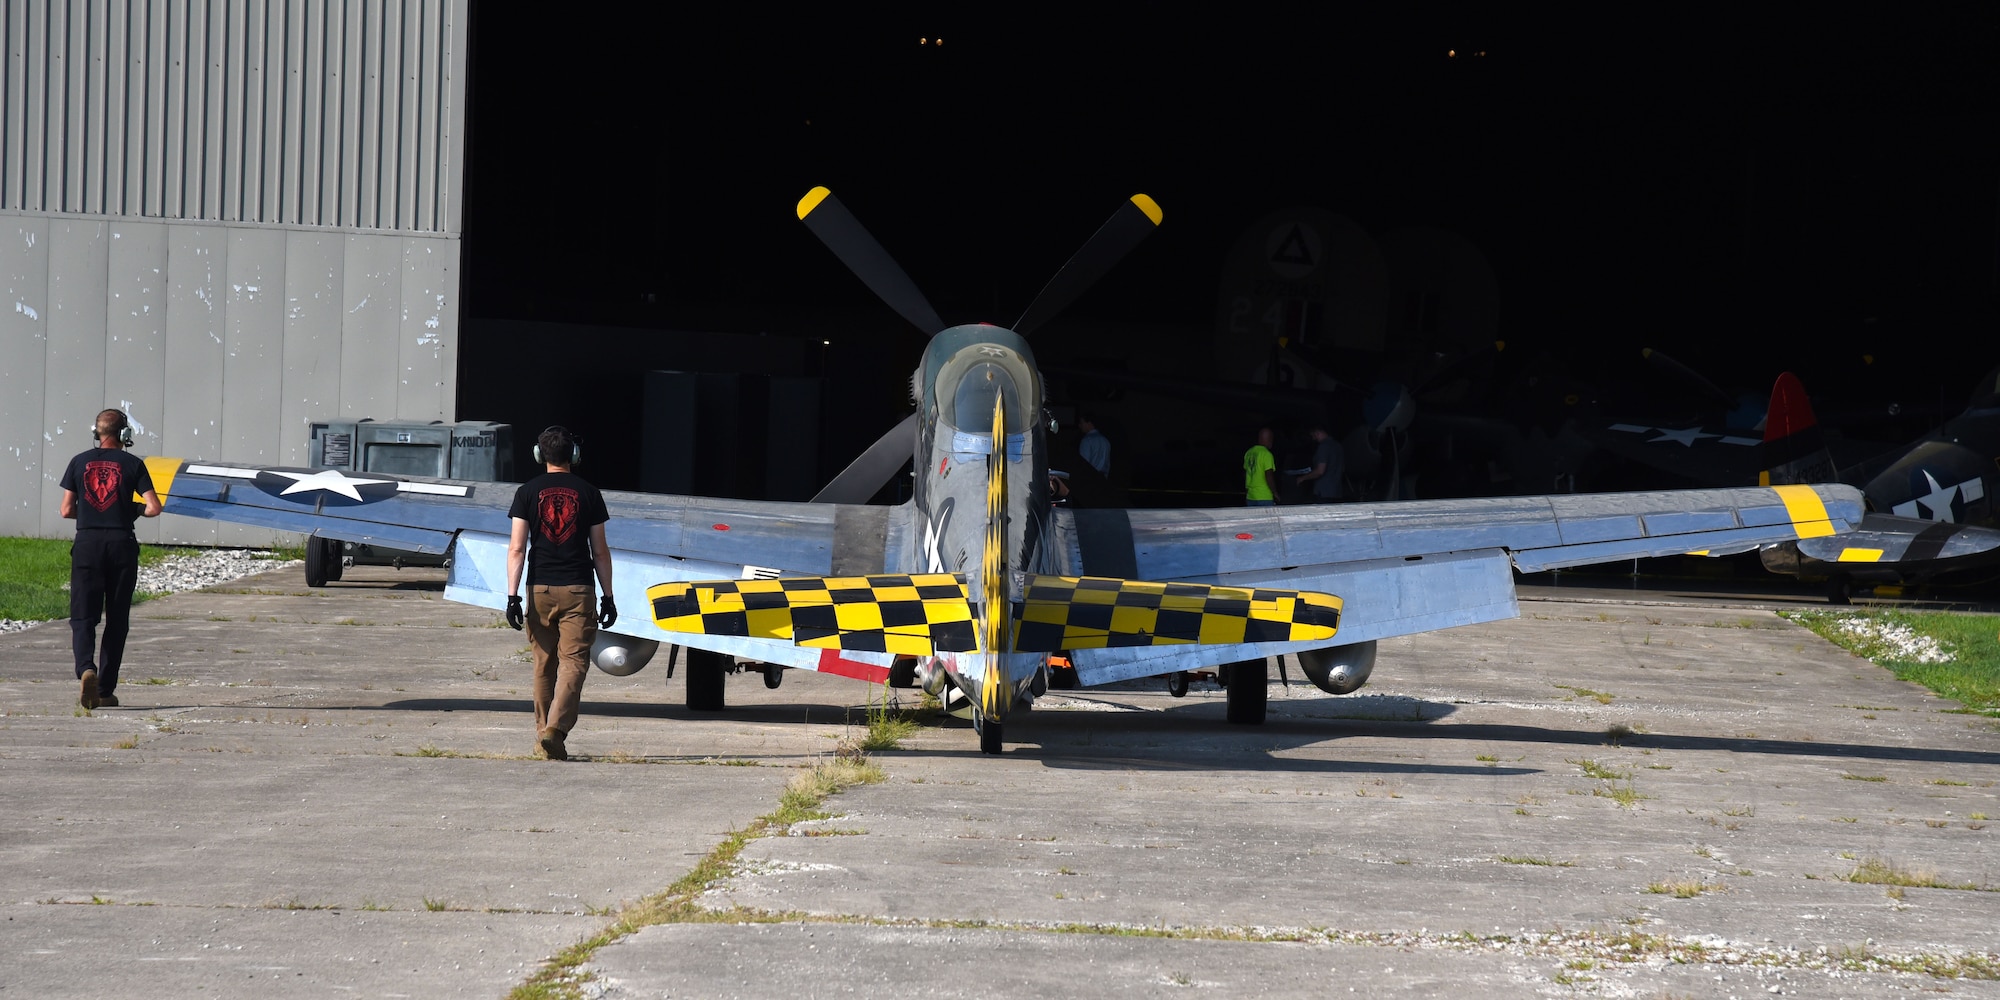 Museum restoration crews move the North American P-51D Mustang back into the WWII Gallery at the National Museum of the U.S. Air Force on Aug. 14, 2018. Several WWII era aircraft were temporarily placed throughout the museum to provide adequate space for the Memphis Belle exhibit opening events. (U.S. Air Force photo by Ken LaRock)